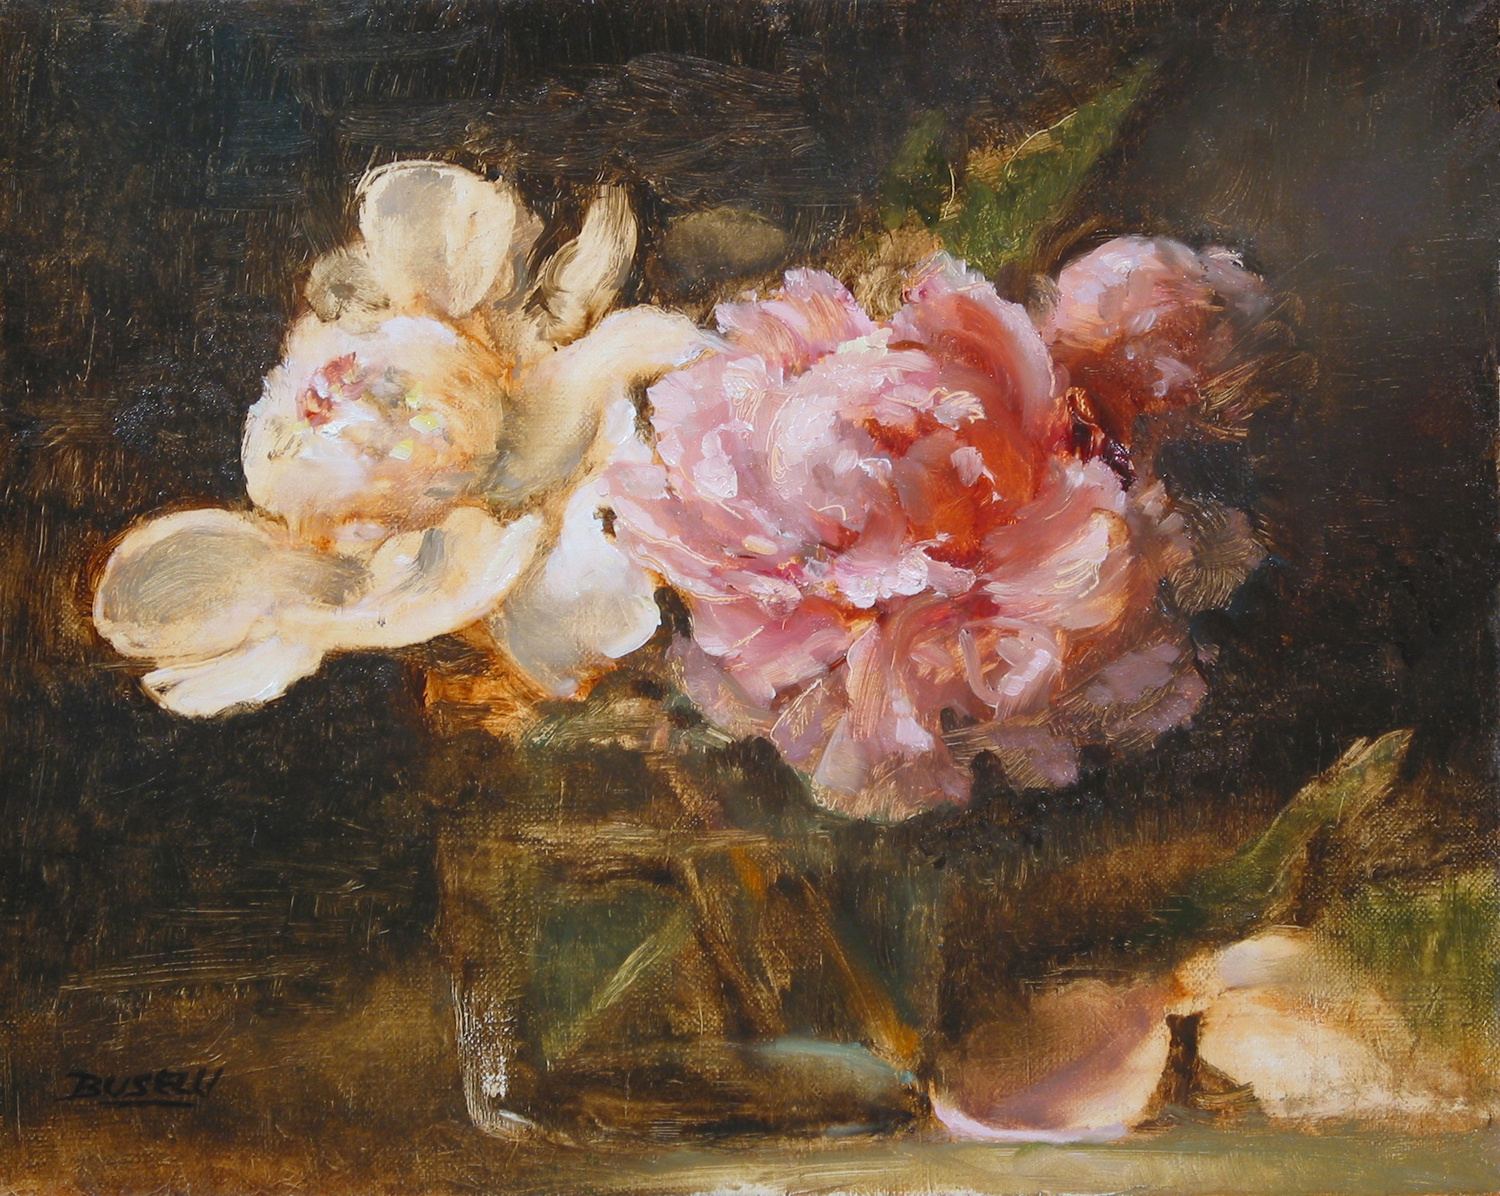   PEONIES    NATIONAL ACADEMY OF DESIGN 175TH JURIED EXHIBITION    OIL PAINTERS OF AMERICA NATIONAL EXHIBITION - WINSOR &amp; NEWTON AWARD OF EXCELLENCE   oil on linen 8" x 10" 